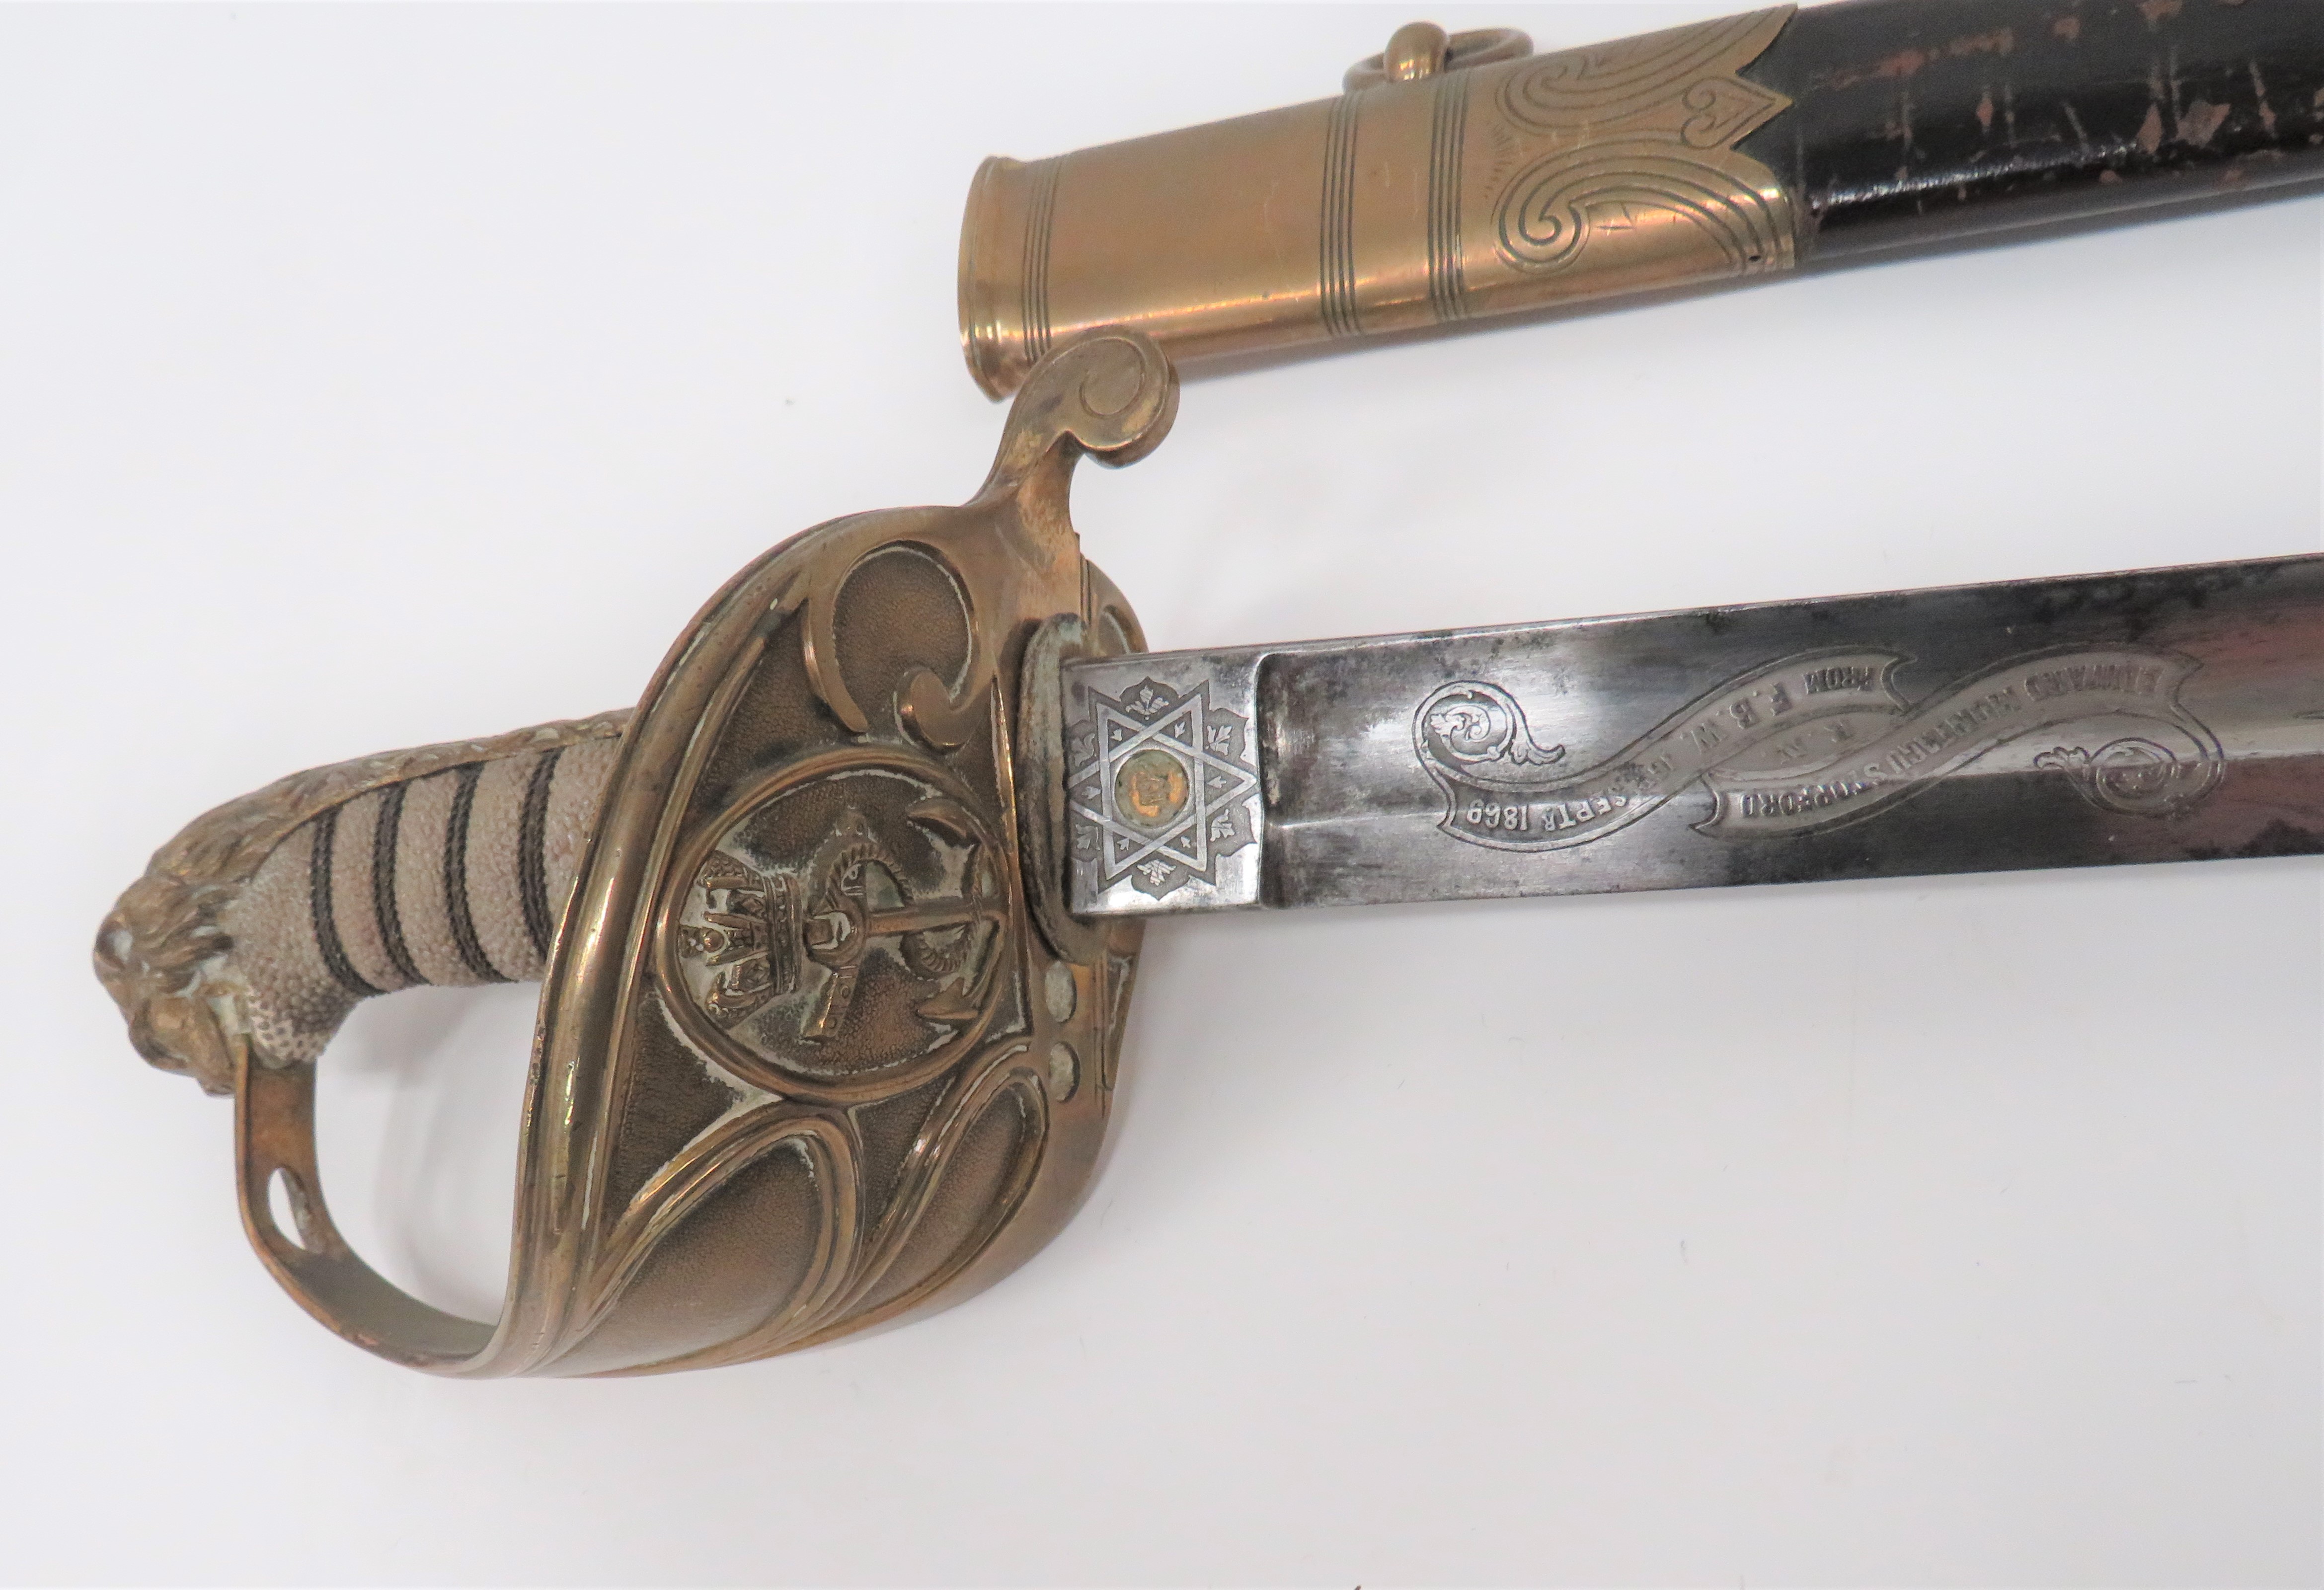 Attributed 1827 Pattern Victorian Royal Navy Officer's by Wilkinson 31 1/2 inch, single edged - Image 2 of 4